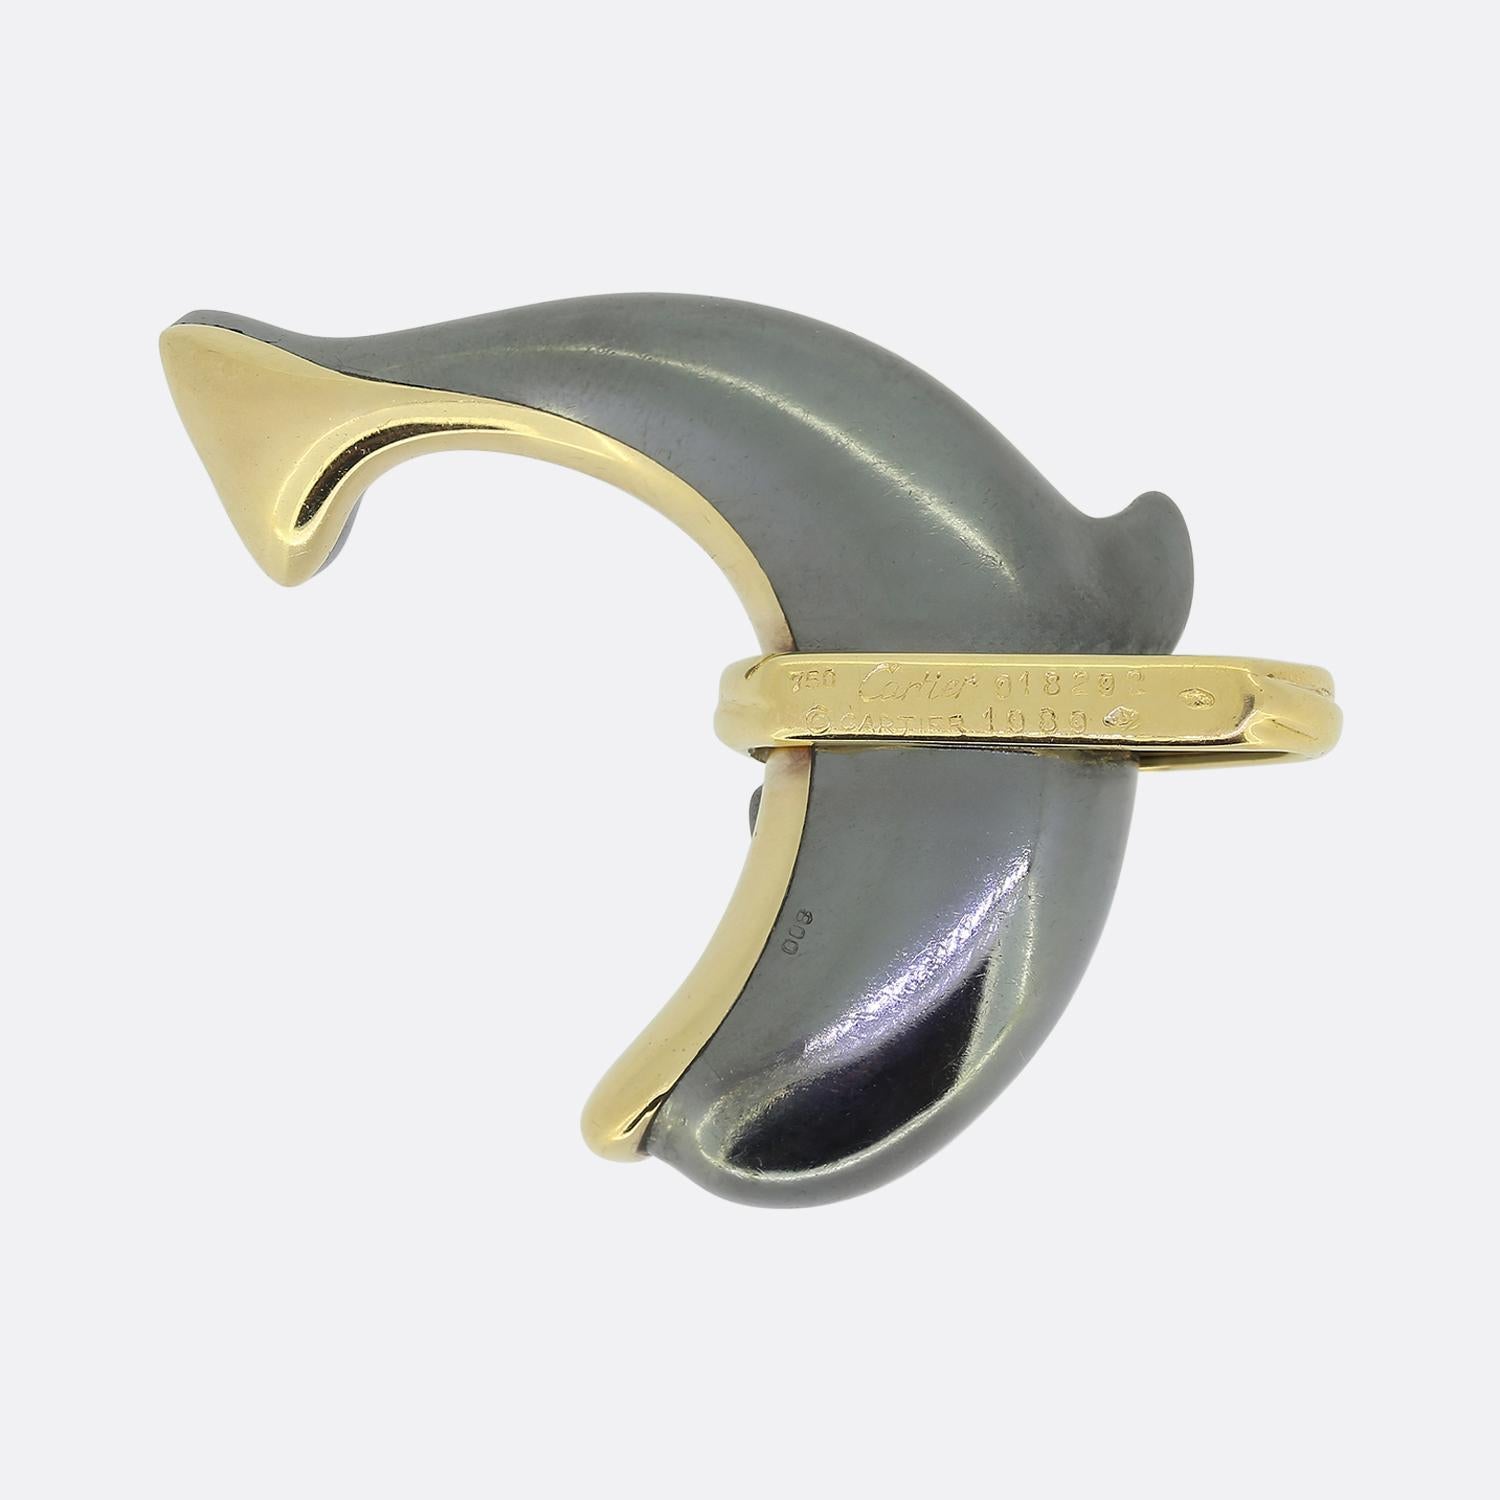 Here we have a playful pendant from the world renowned luxury jewellery house of Cartier. This piece has been crafted into the shape of a dolphin from both 18ct yellow gold and hematite to create a polished contrasted finish. A ribbed hoop acting as